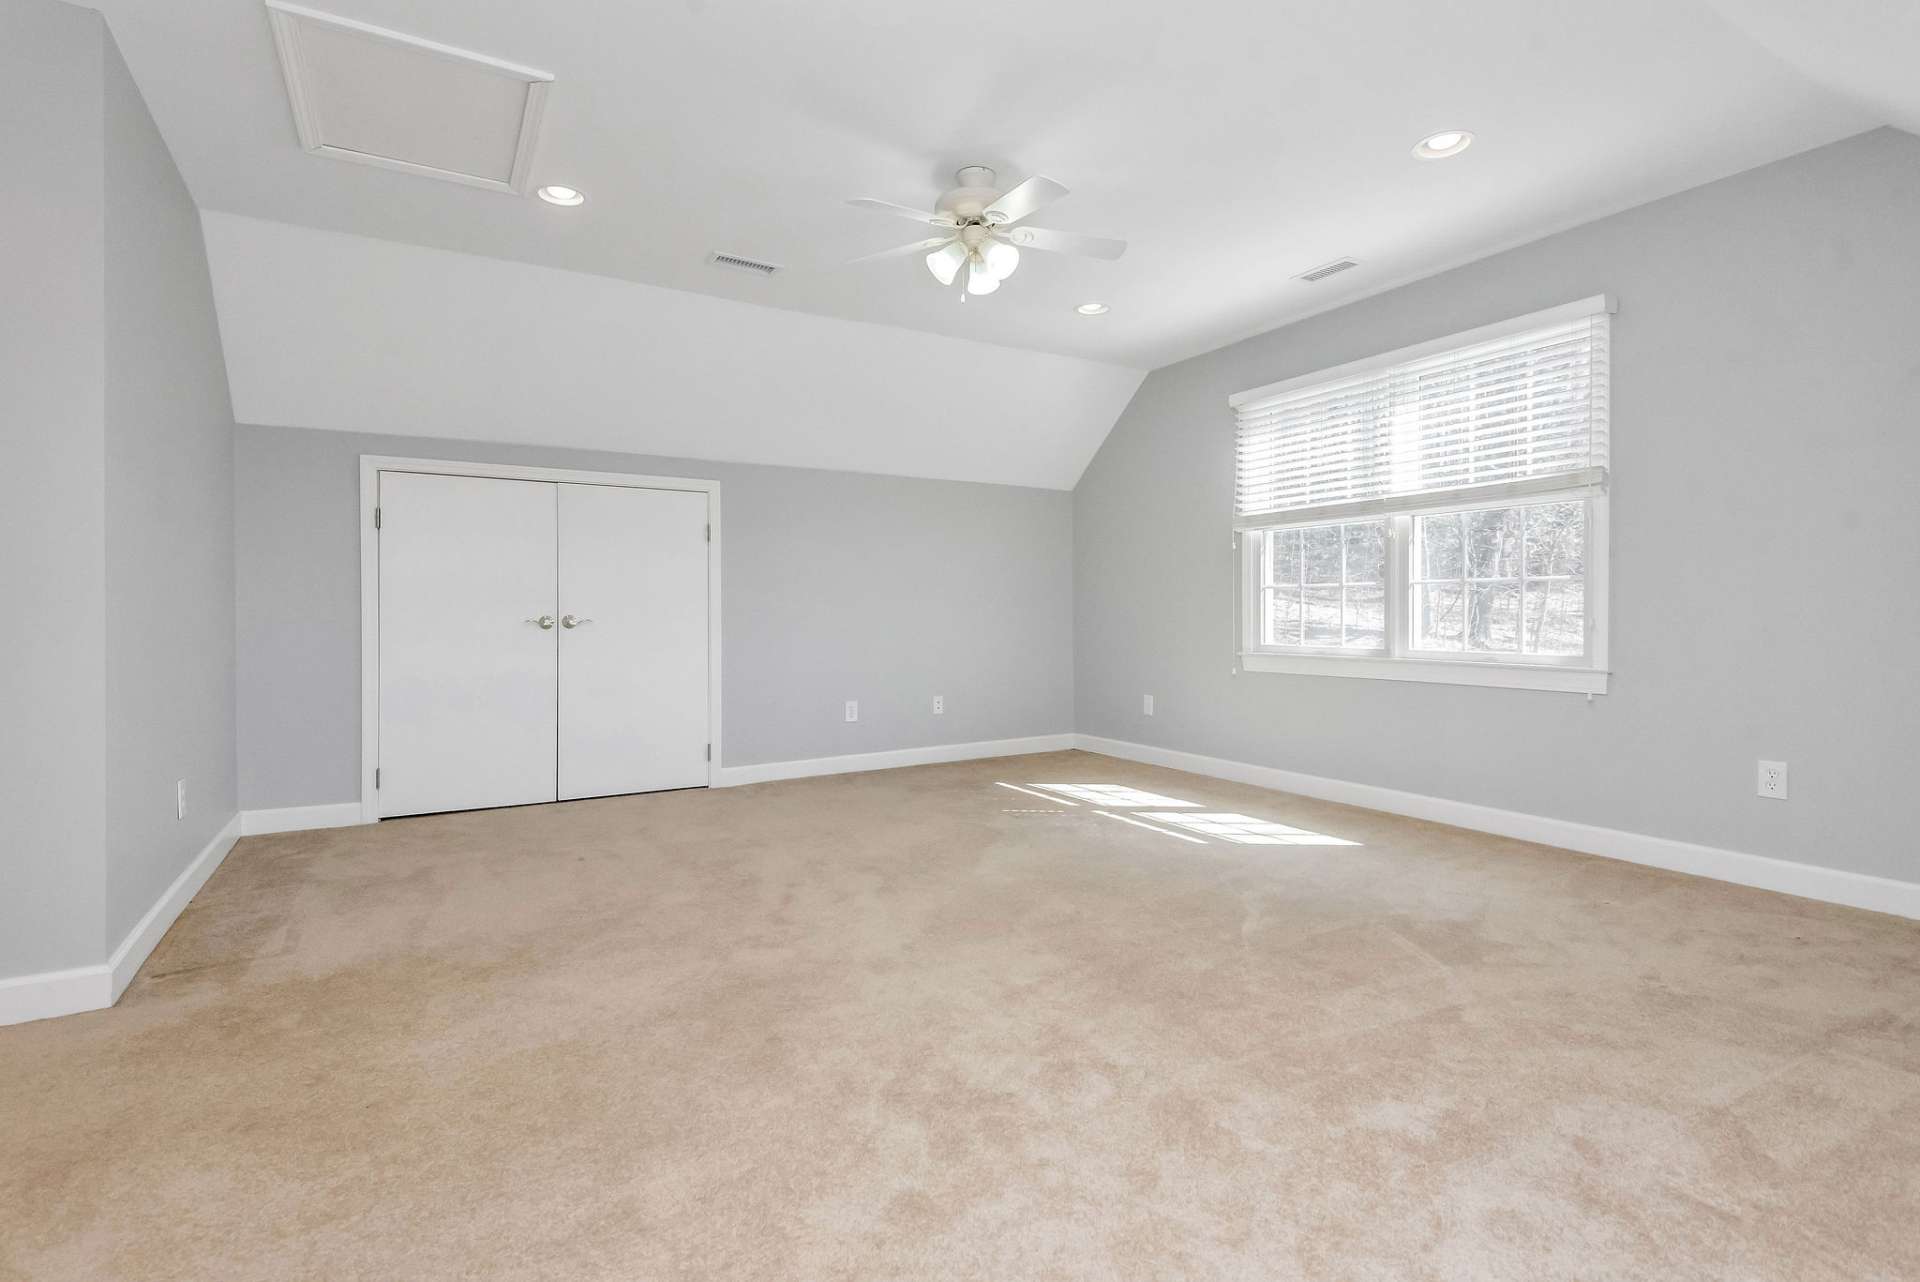 This spacious room is also located on the upper level. Whether you envision it as a playroom for children, a recreational space for entertaining guests, or a hobby room for pursuing creative endeavors, this versatile area can accommodate your needs with ease.